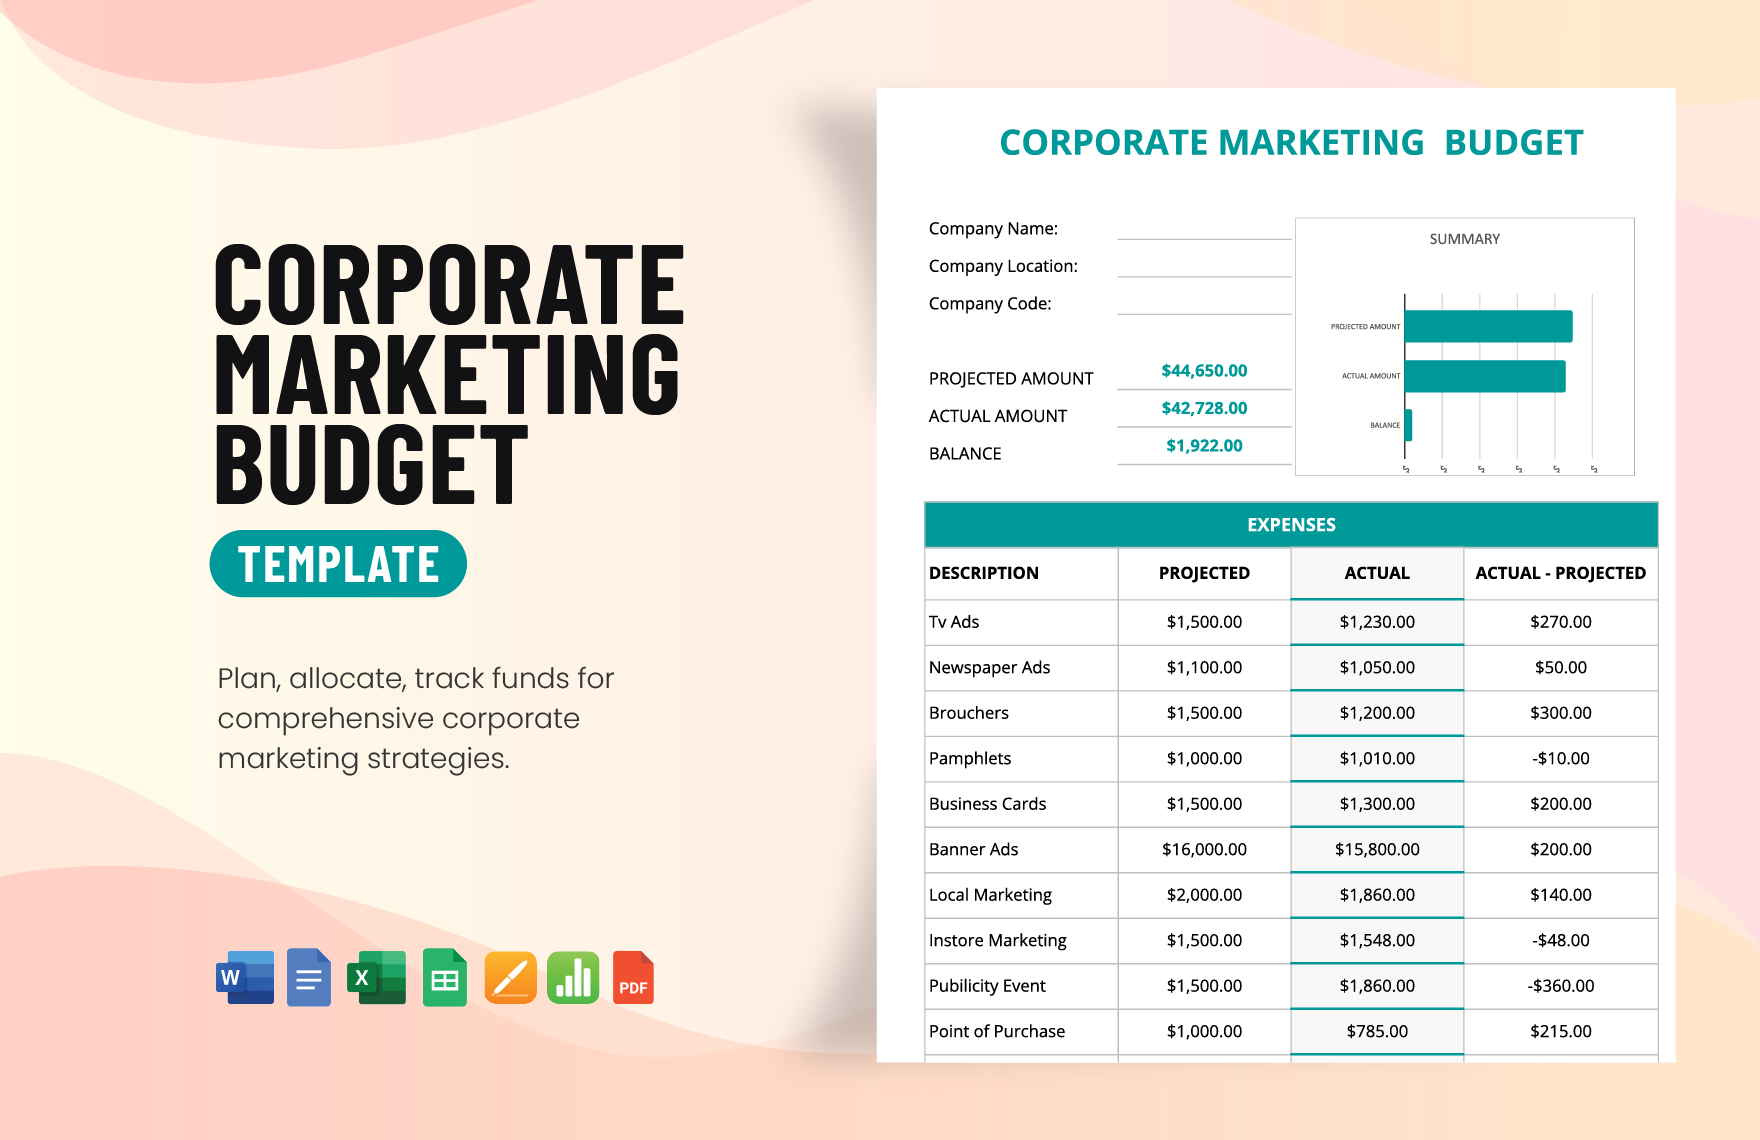 Corporate Marketing Budget Template in Word, Google Docs, Excel, PDF, Google Sheets, Apple Pages, Apple Numbers